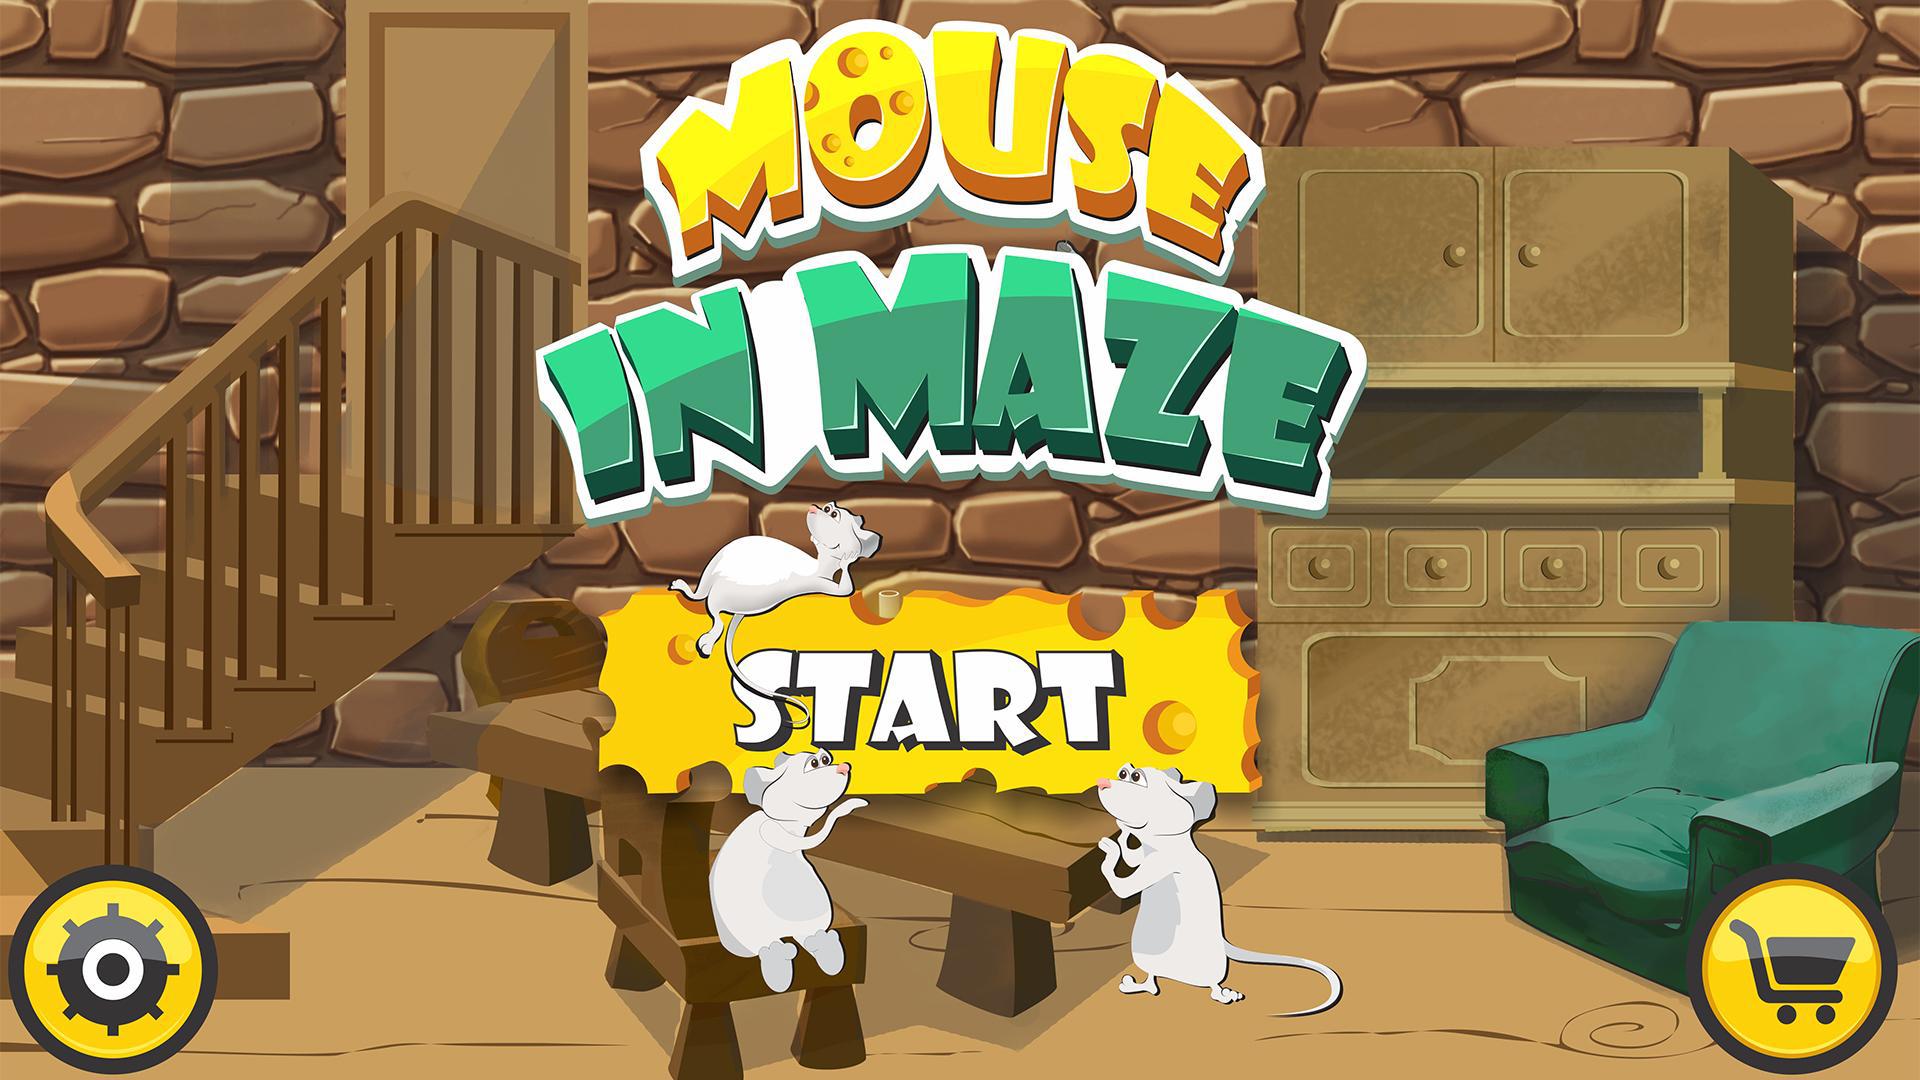 Mouse In Maze_截图_3